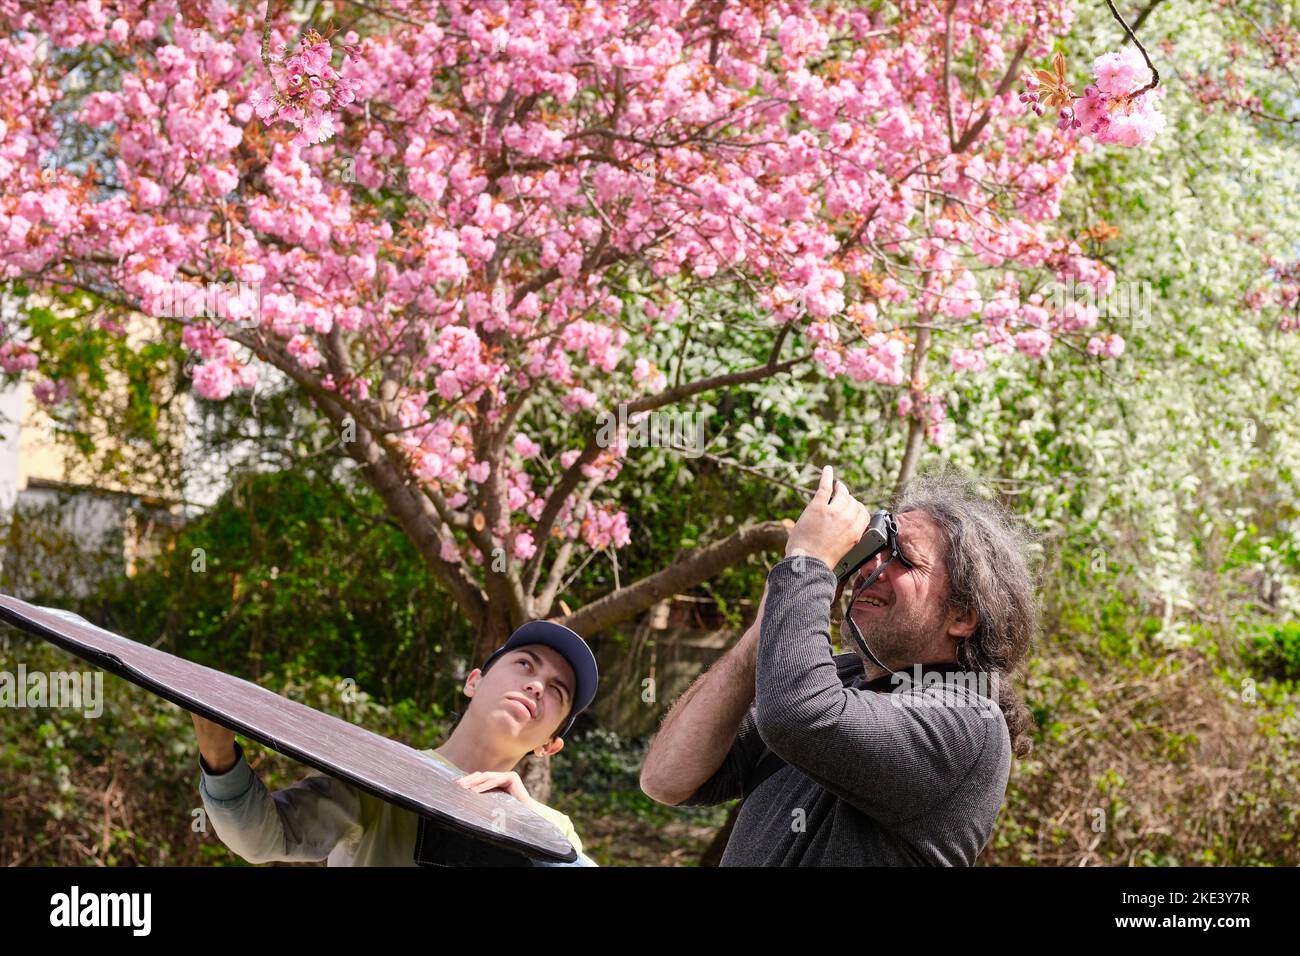 Father and son photographers shooting Sakura blossoms in springtime. The son assists with a reflector the father who is photographing flowers. A Stock Photo